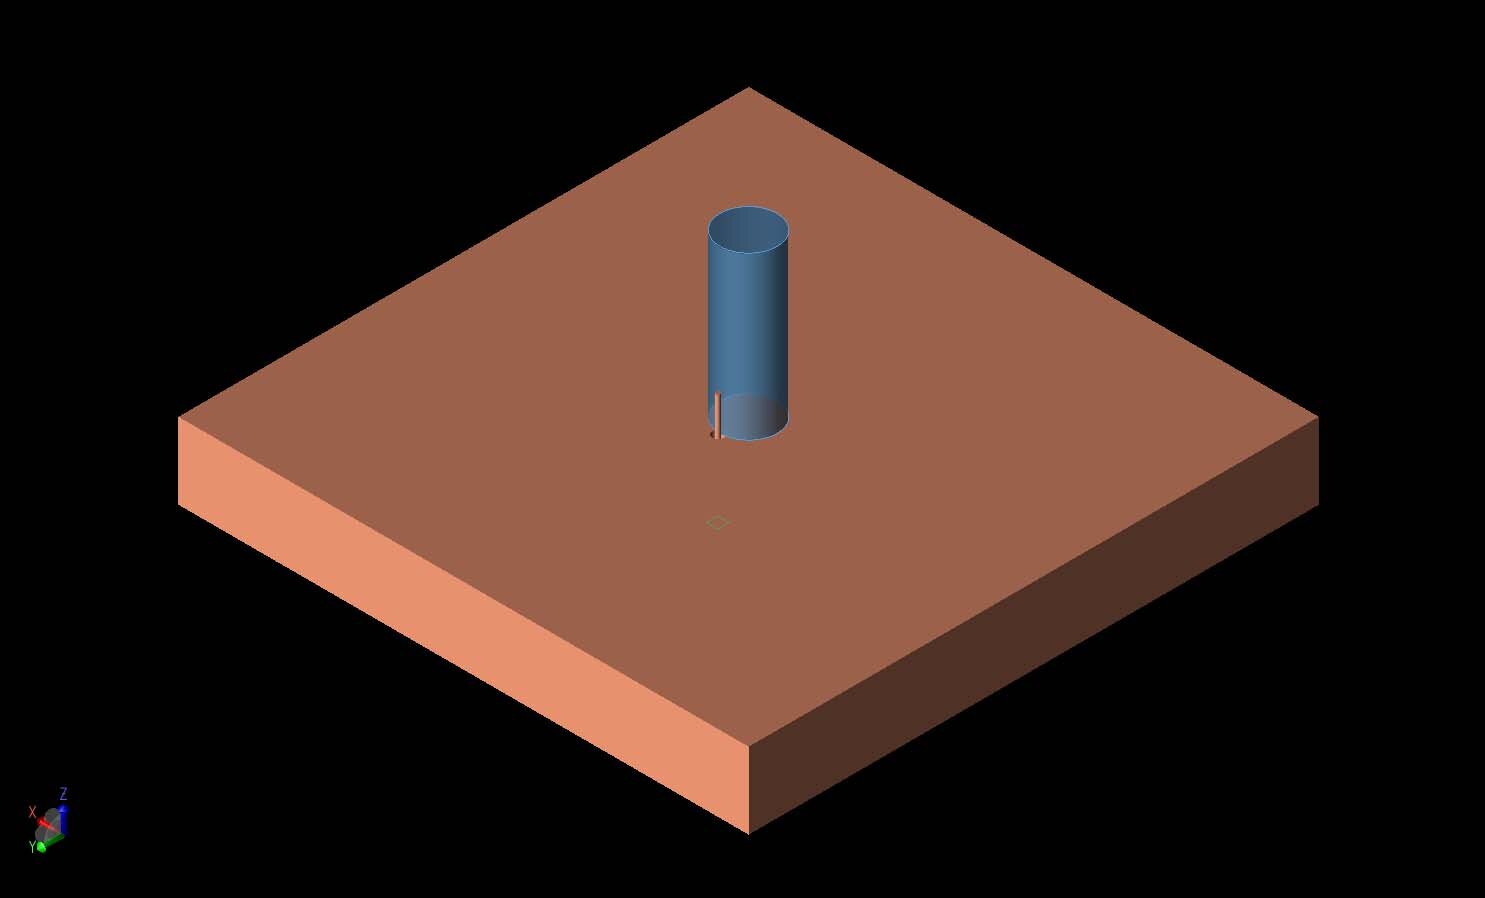 Figure 1:  A three-dimensional CAD representation of the geometry is shown with a conducting ground plane under a cylindrical dielectric resonator with permittivity of 7.  The resonator is excited by a coaxial probe on one side of the cyli…